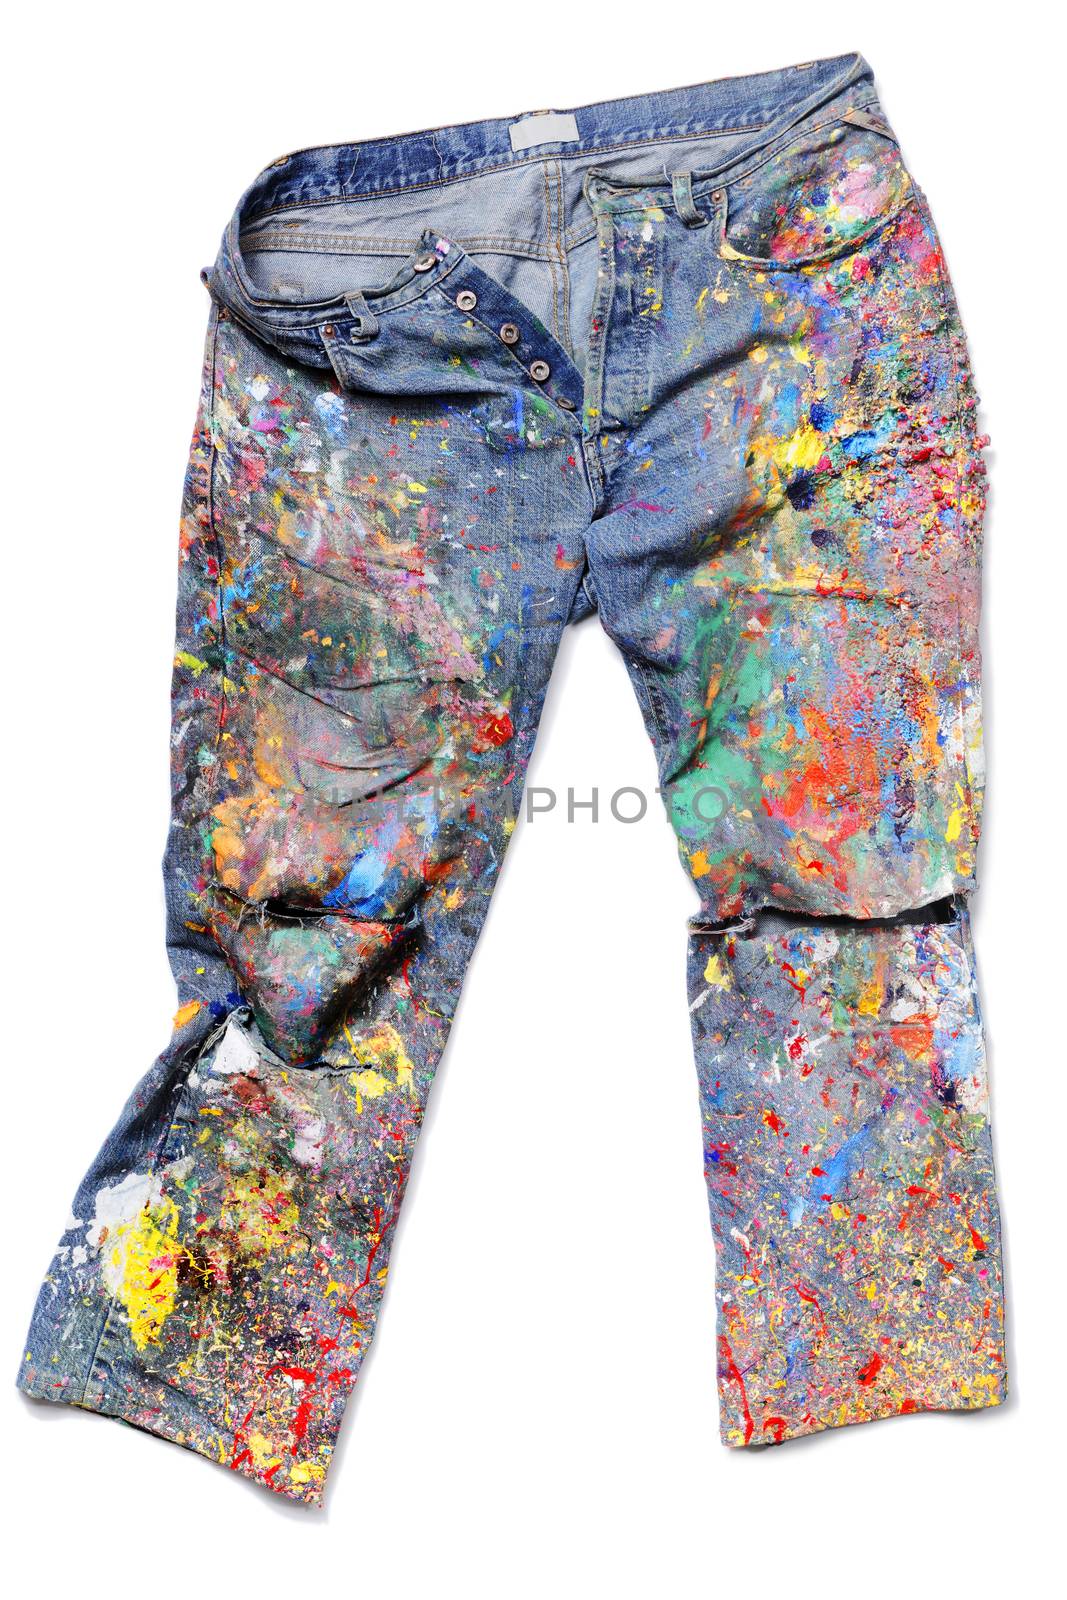 Old Jeans covered with acrylic artist's paints.